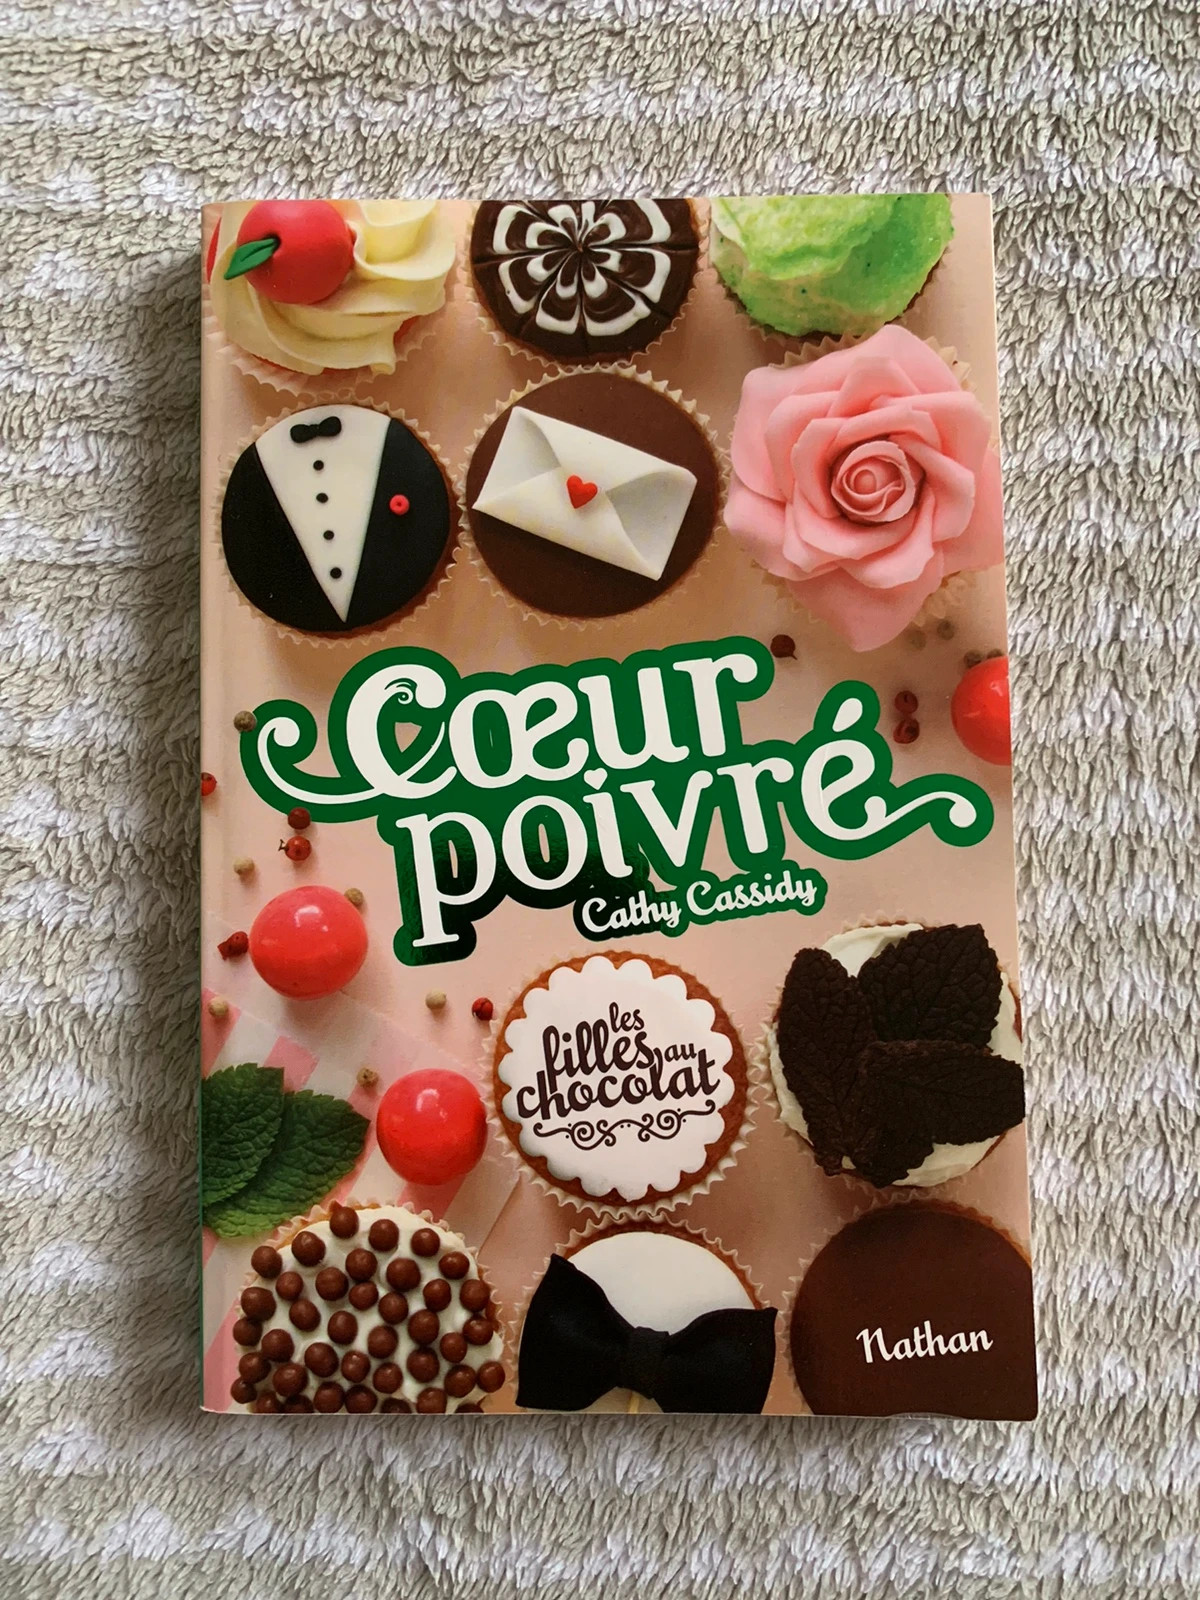 Cathy Cassidy Les filles au chocolat (French Edition): Cathy Cassidy, Anne  Guitton (Traduction), Nathan: 9782092564318: : Books